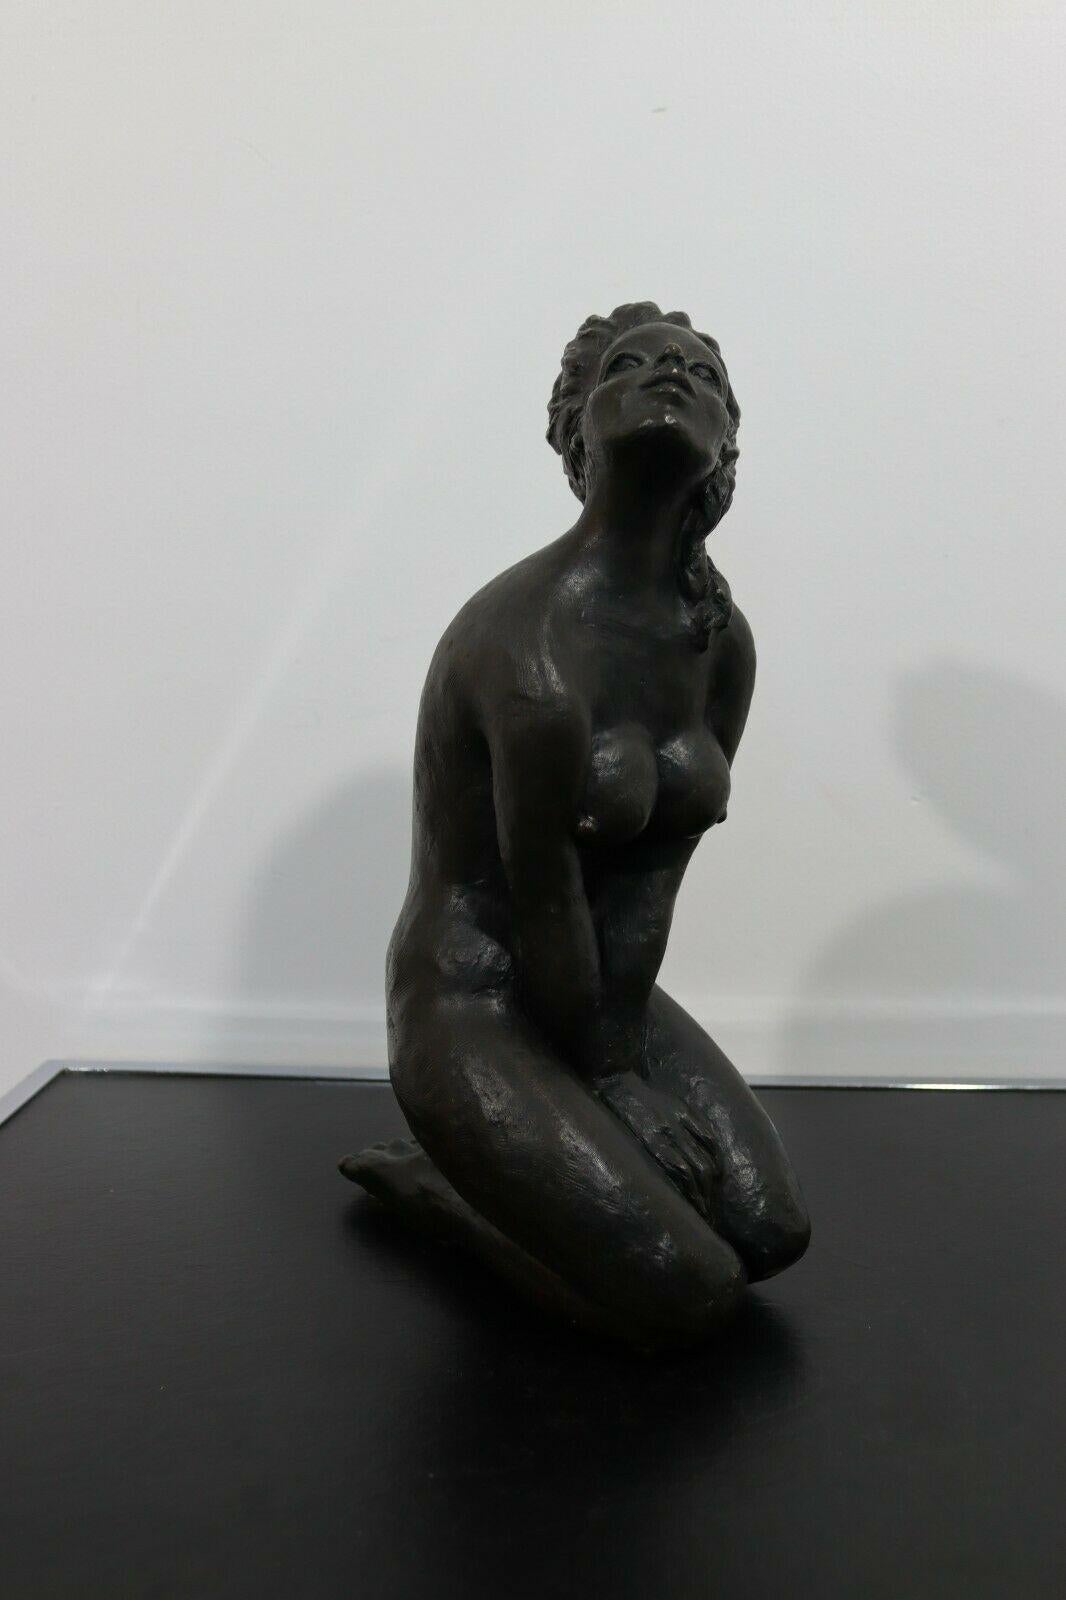 Mid-20th Century Mid-Century Modern Seated Woman Figure Modern Bronze Sculpture Betty Jacob, 1968 For Sale